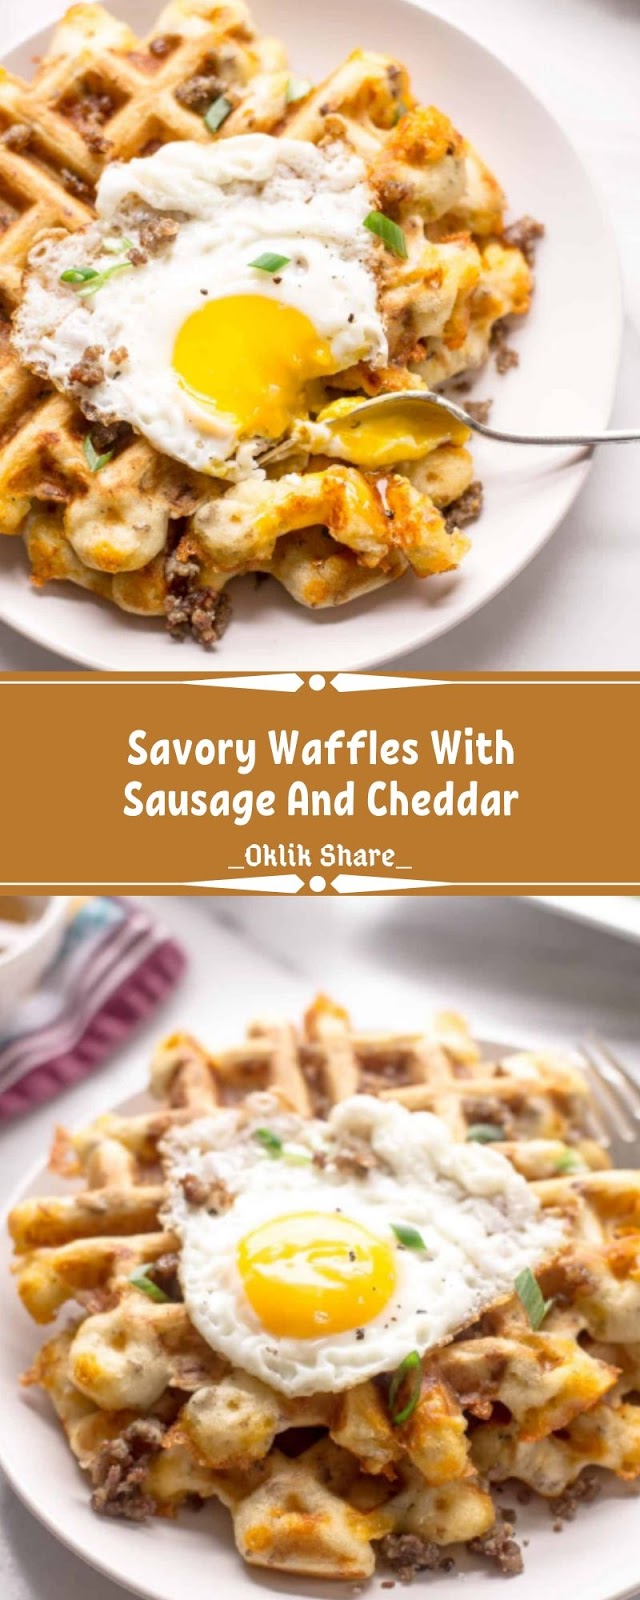 Savory Waffles With Sausage And Cheddar